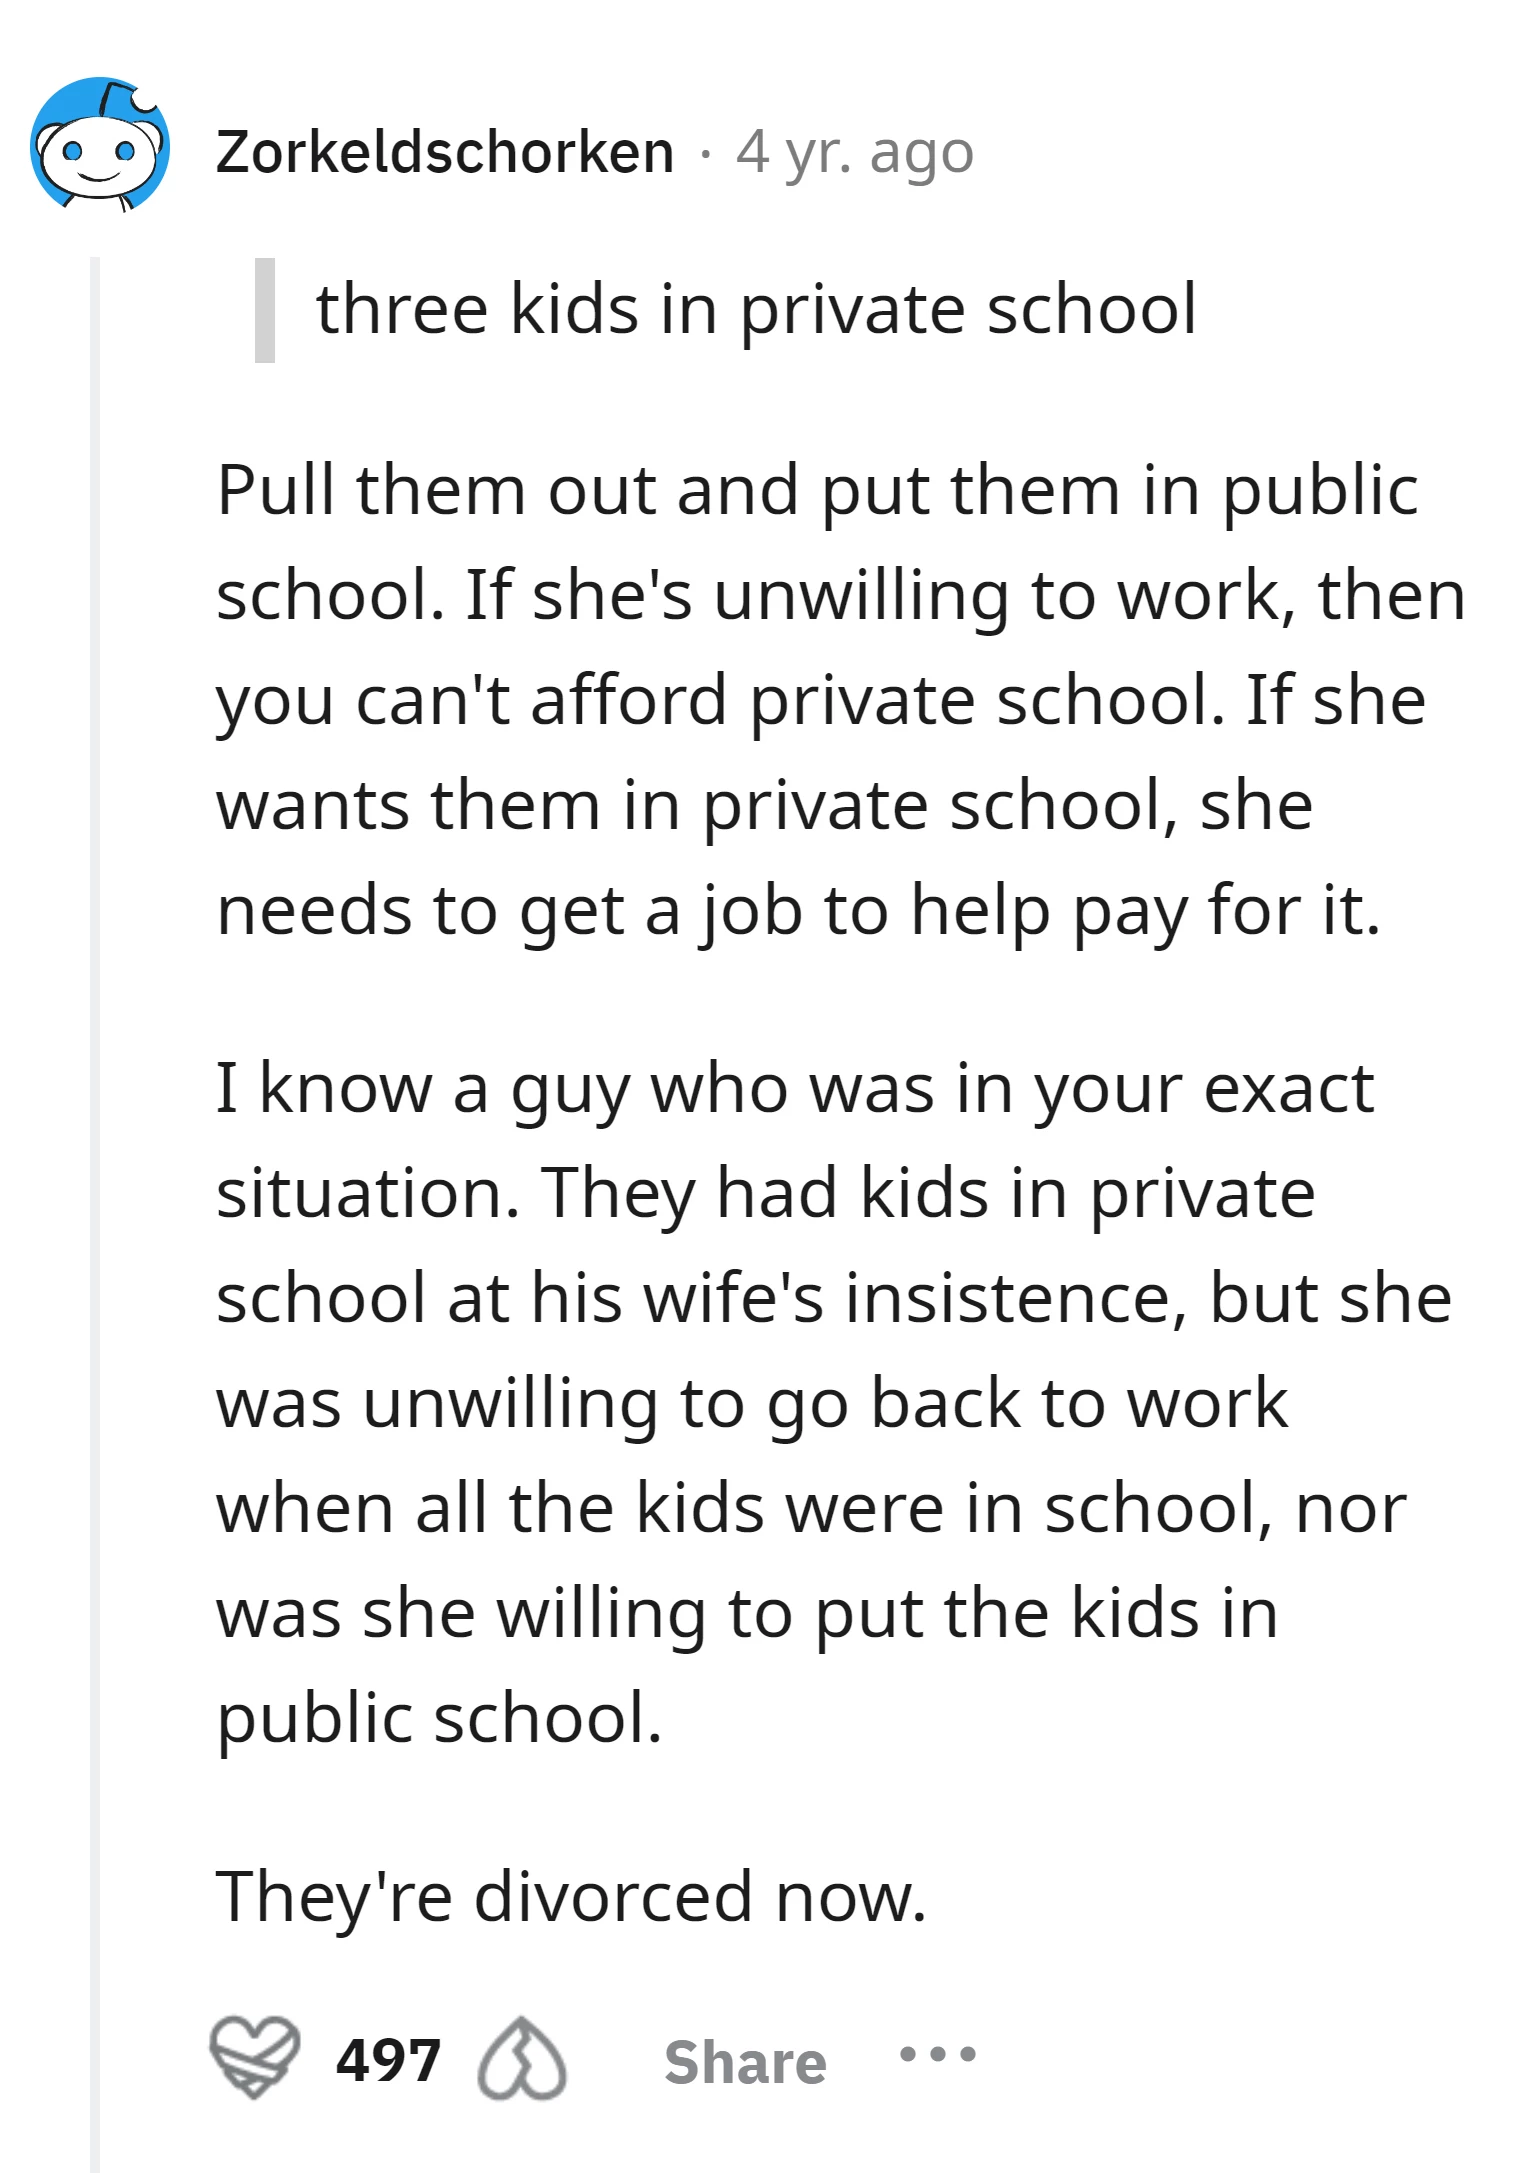 Redditor advises the OP to consider moving the children to public school if the wife is unwilling to work